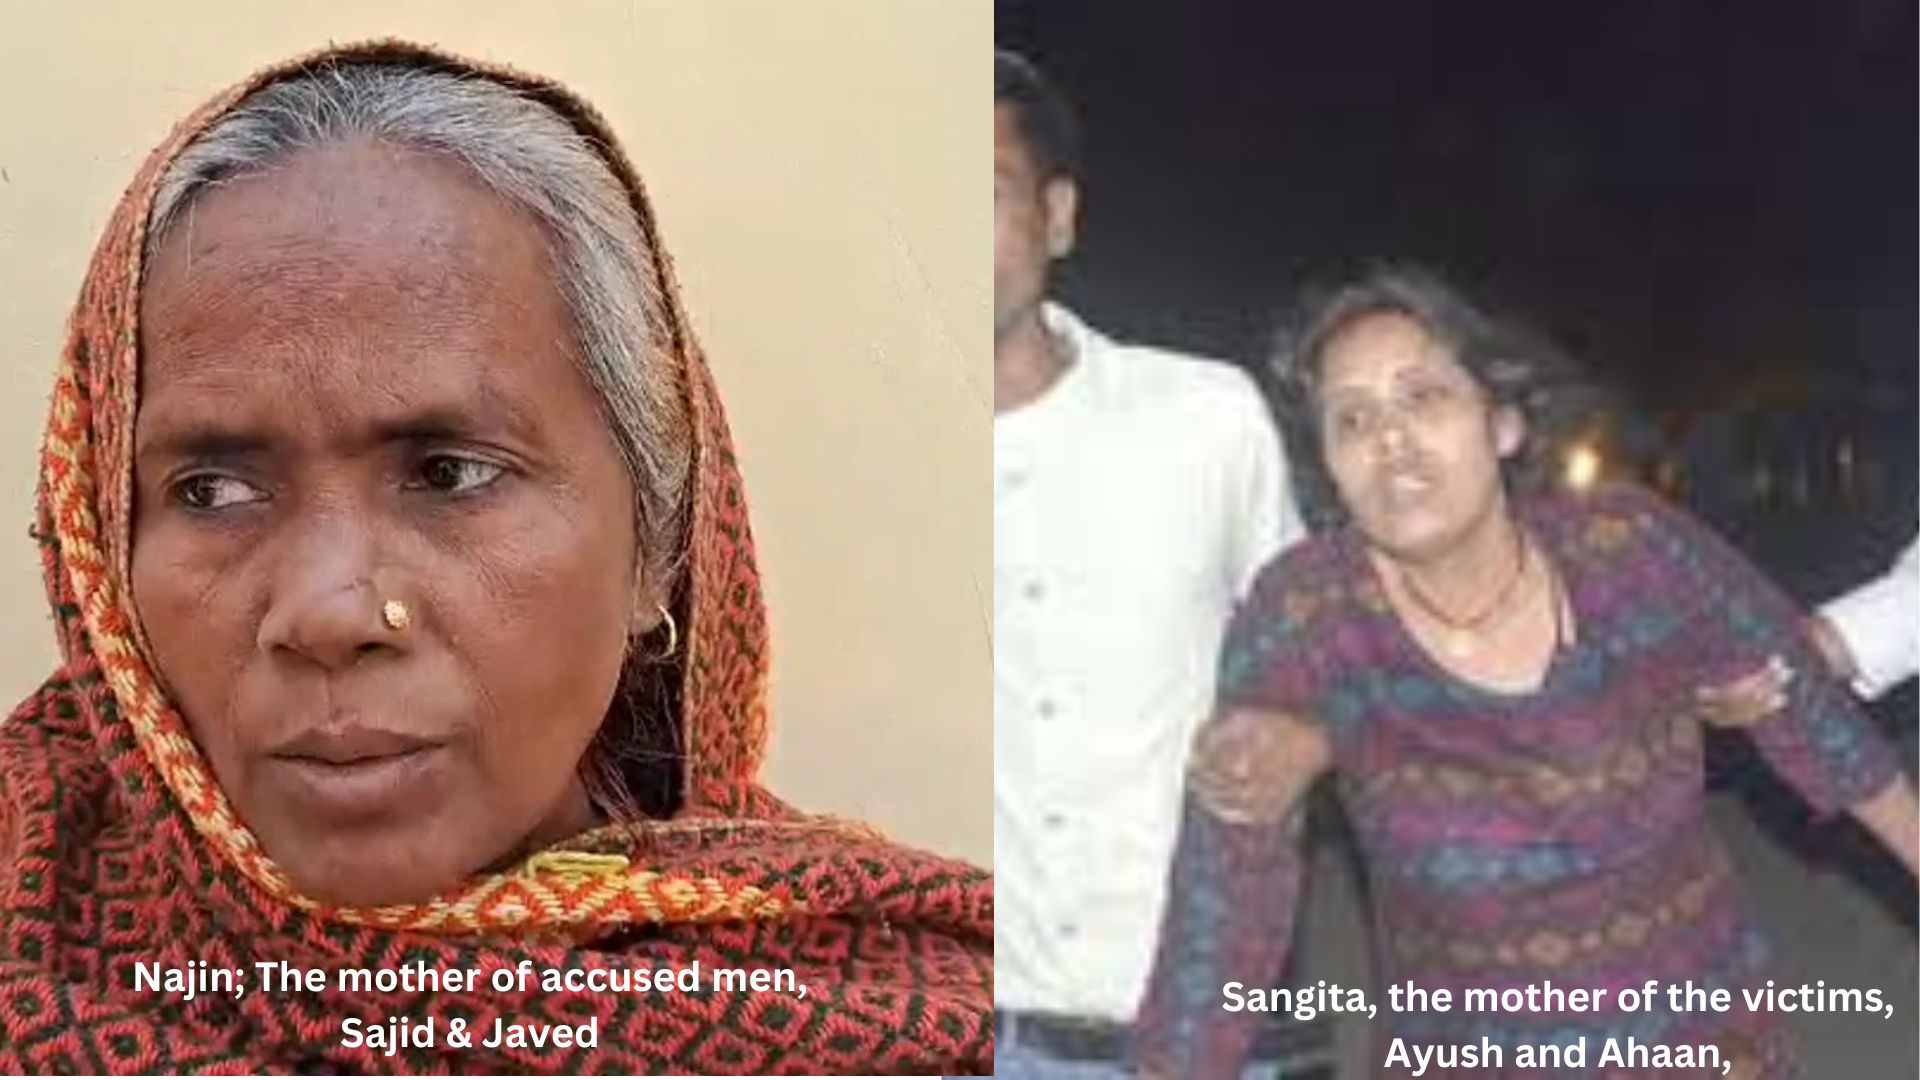 Badaun Double Murder Case: ‘If you commit crime, you will suffer’ says Mother of accused Men